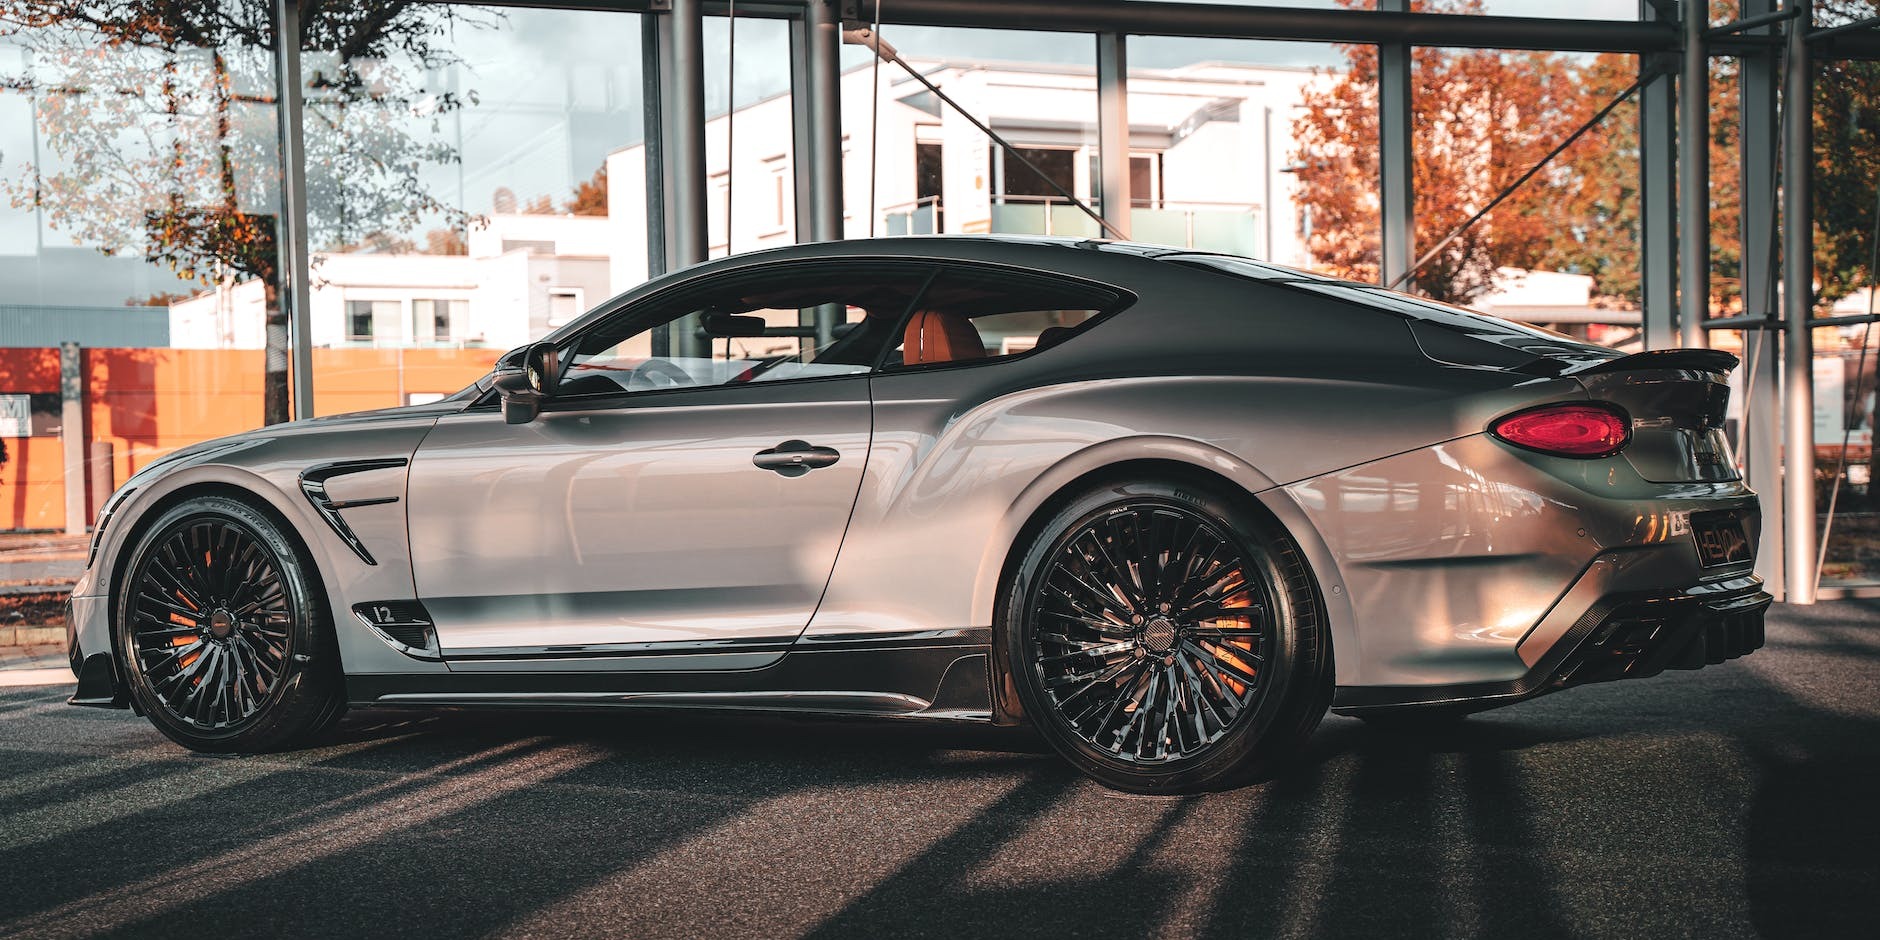 Maintaining Your Bentley's Prestige: Tips for Newport Owners